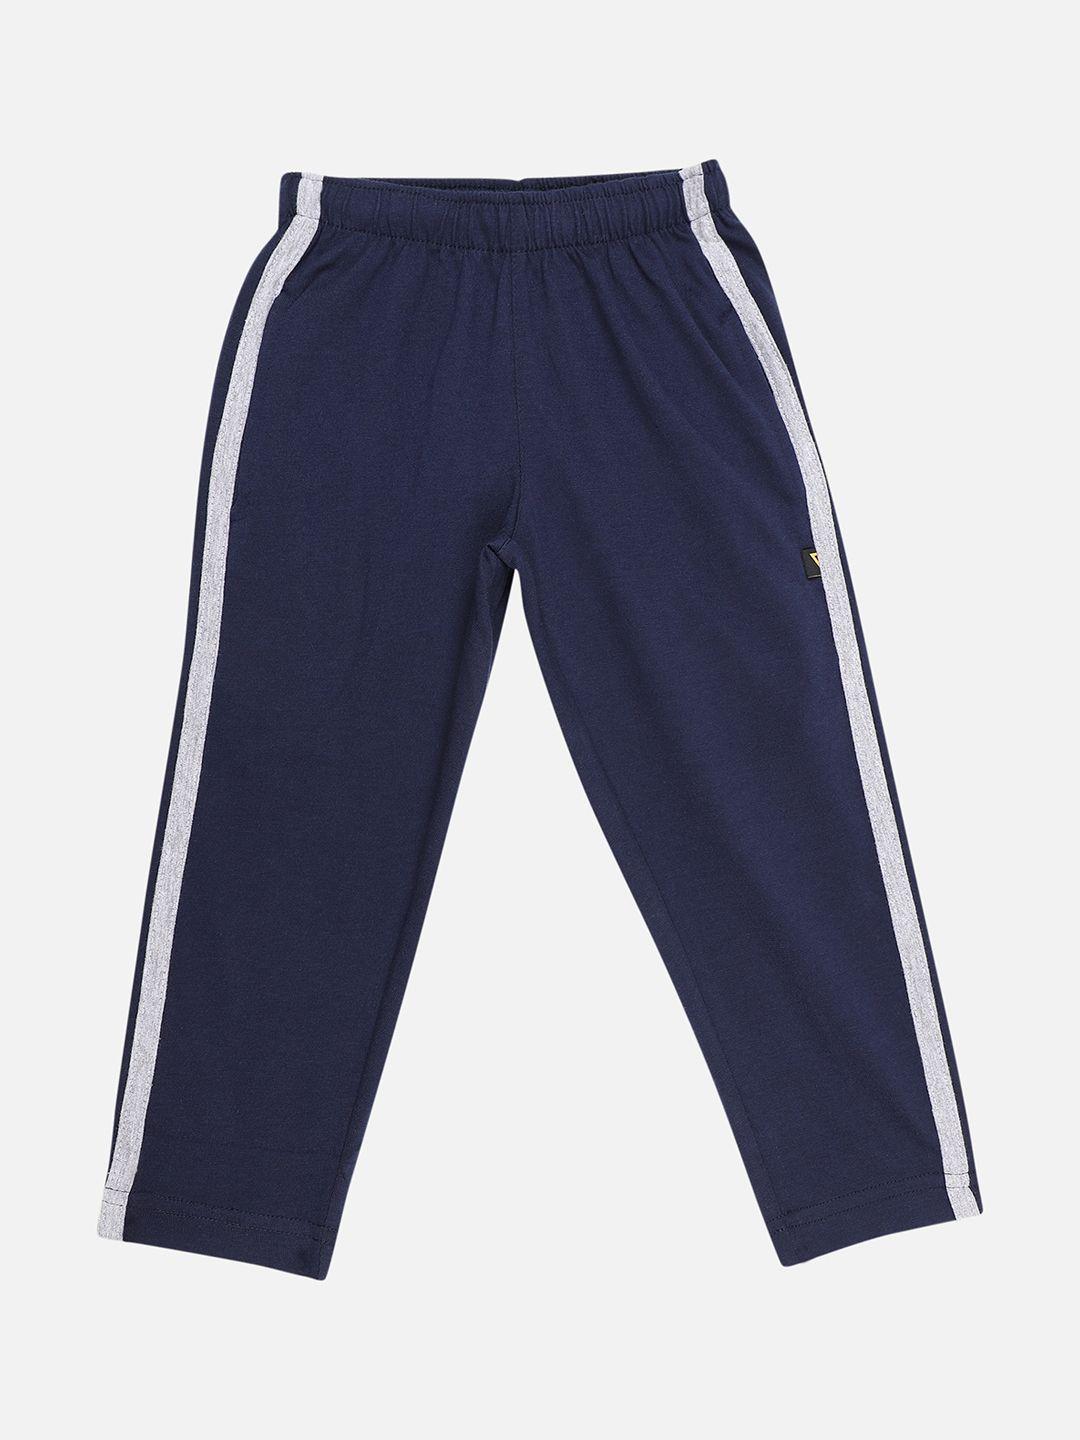 proteens boys navy blue solid track pants